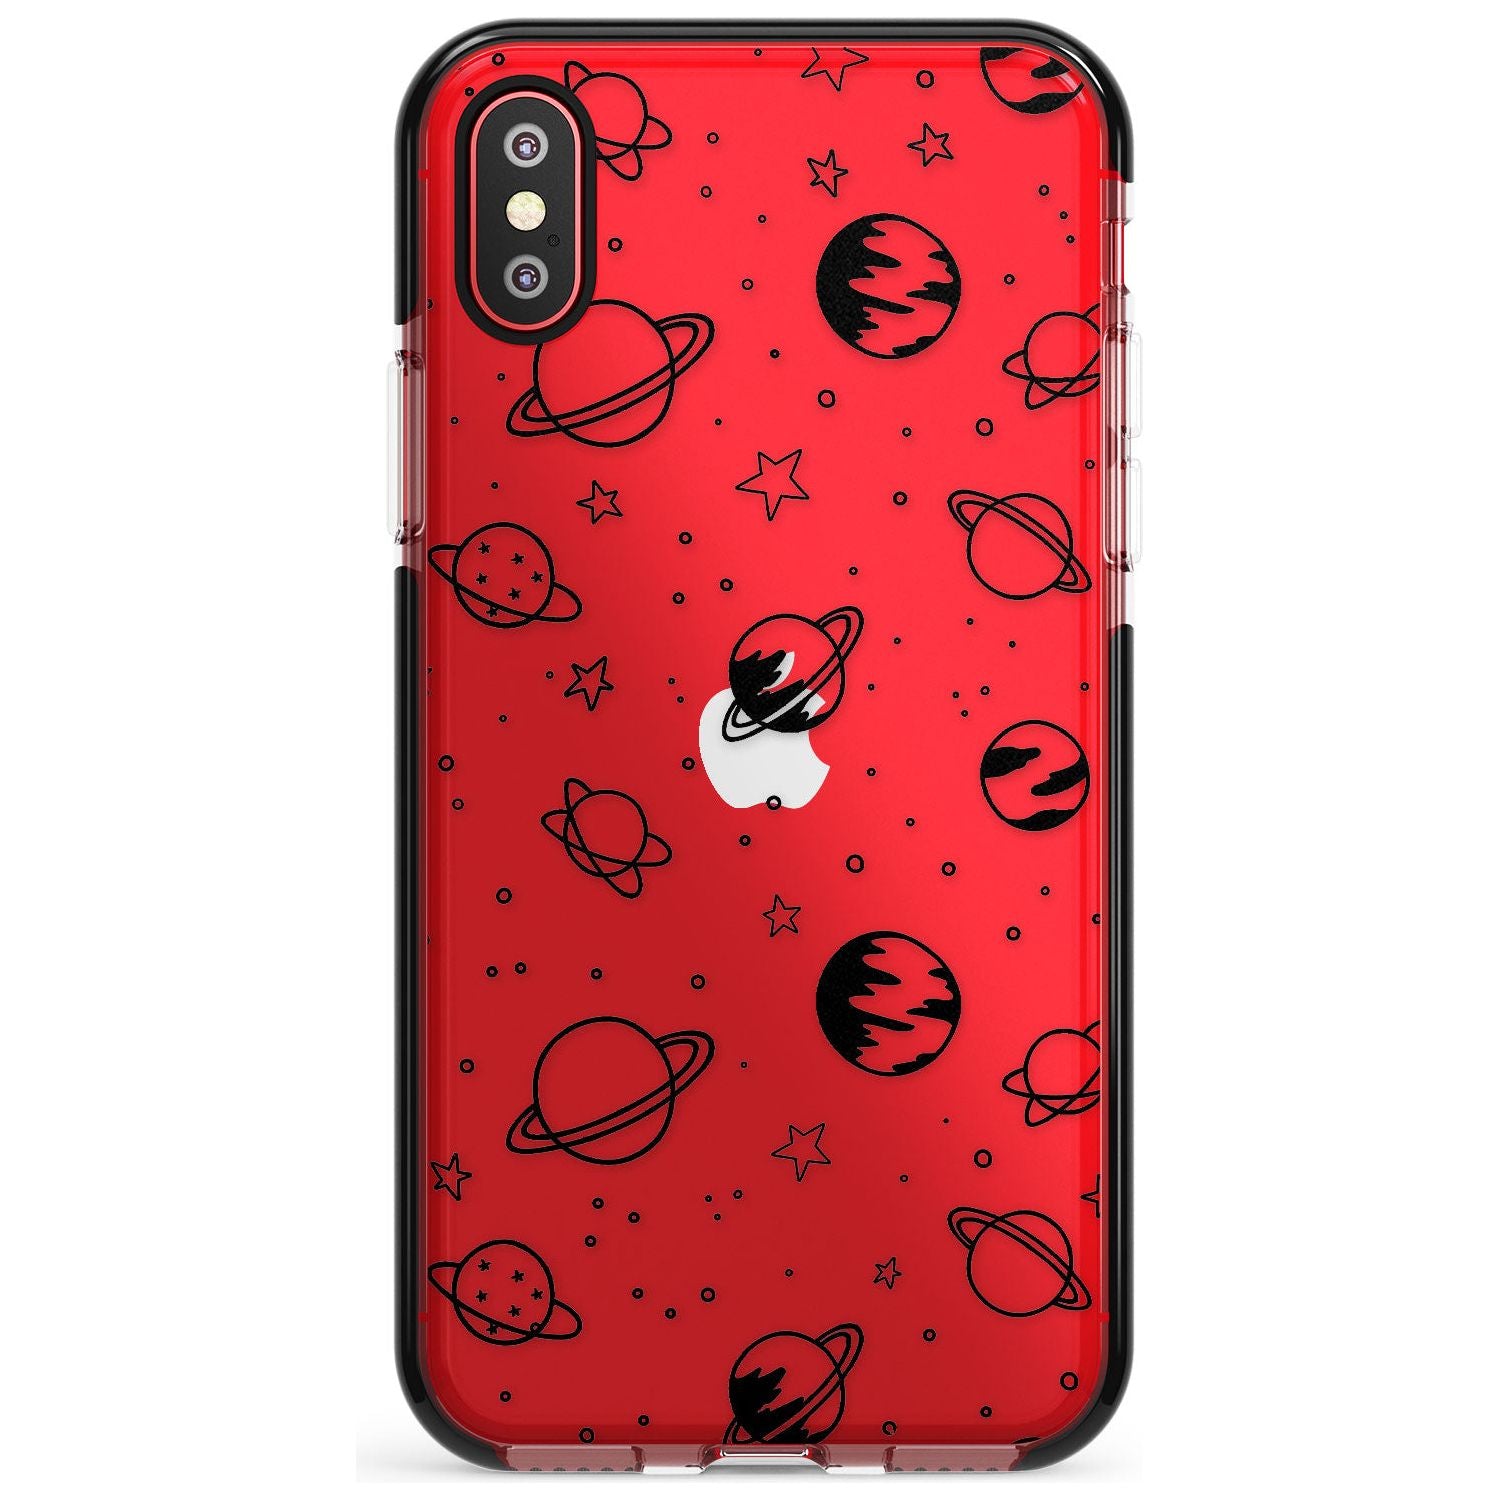 Outer Space Outlines: Black on Clear Pink Fade Impact Phone Case for iPhone X XS Max XR